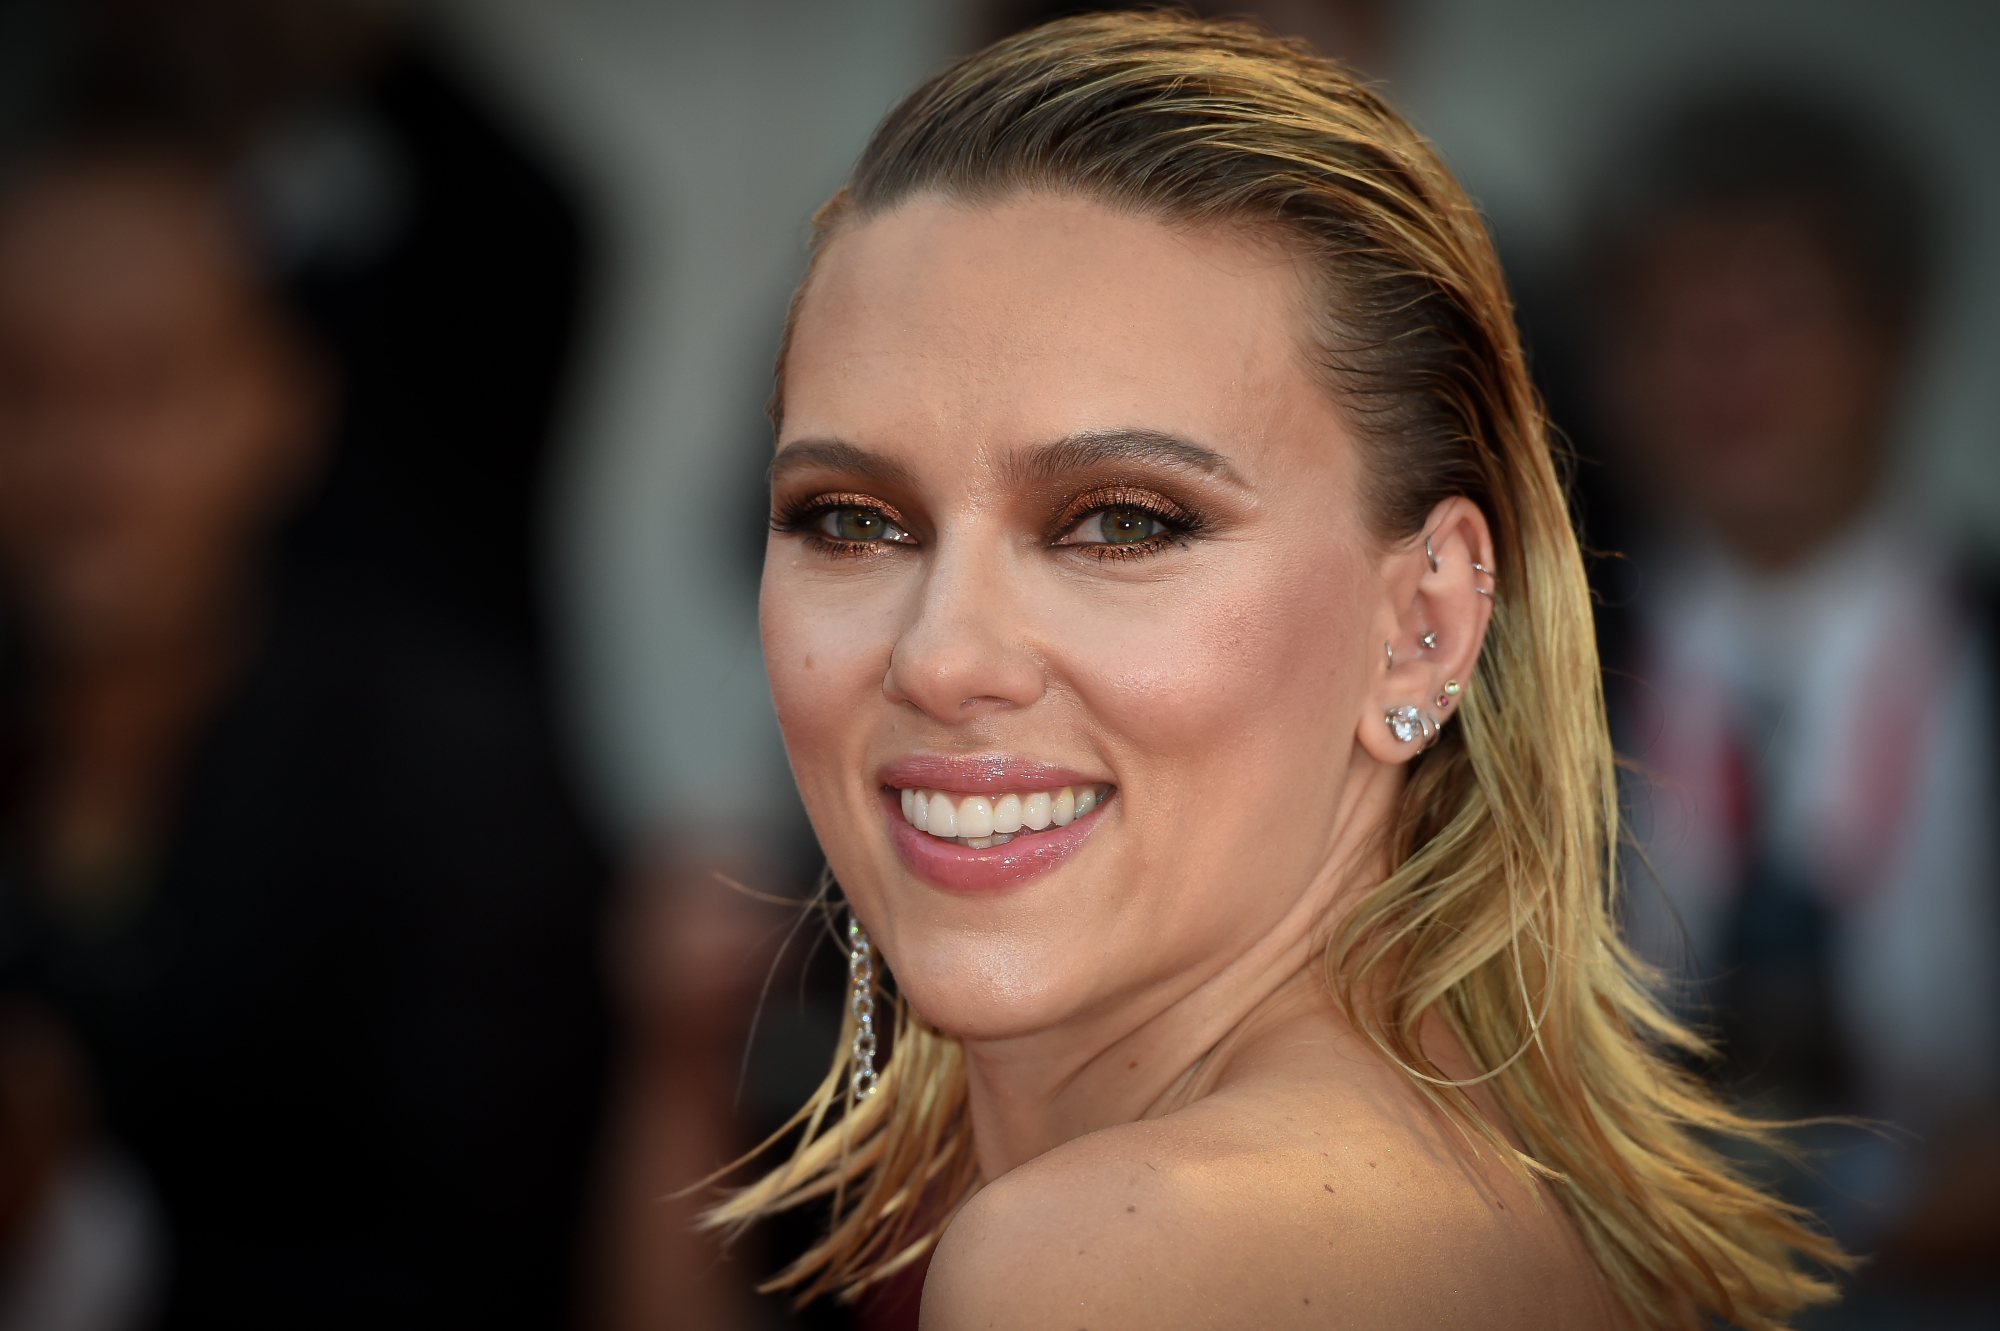 Scarlett Johansson, who was nominated at the Oscars, smiling with ear piercings and slicked back hair